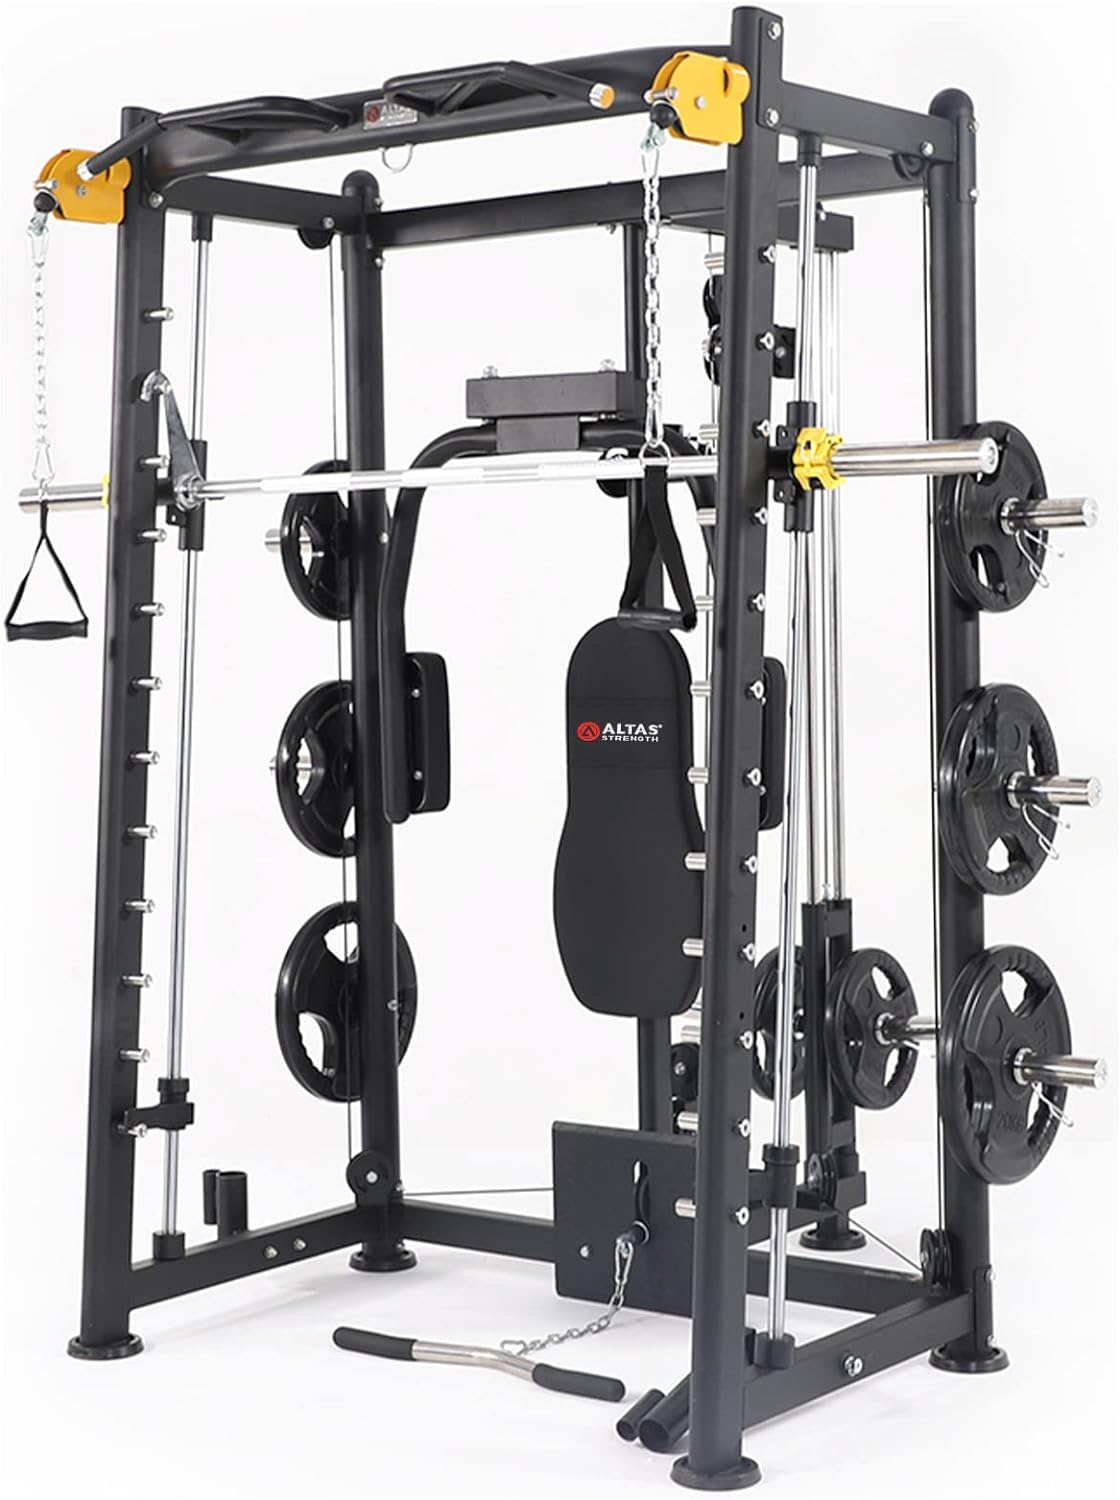 ALTAS STRENGTH Home Gym Equipment Smith Machine with Pulley System Gym Squat Rack Pull Up Bar Upper Body Strength Training Leg Developer Commercial Fitness Equipment Included Accessories 3000